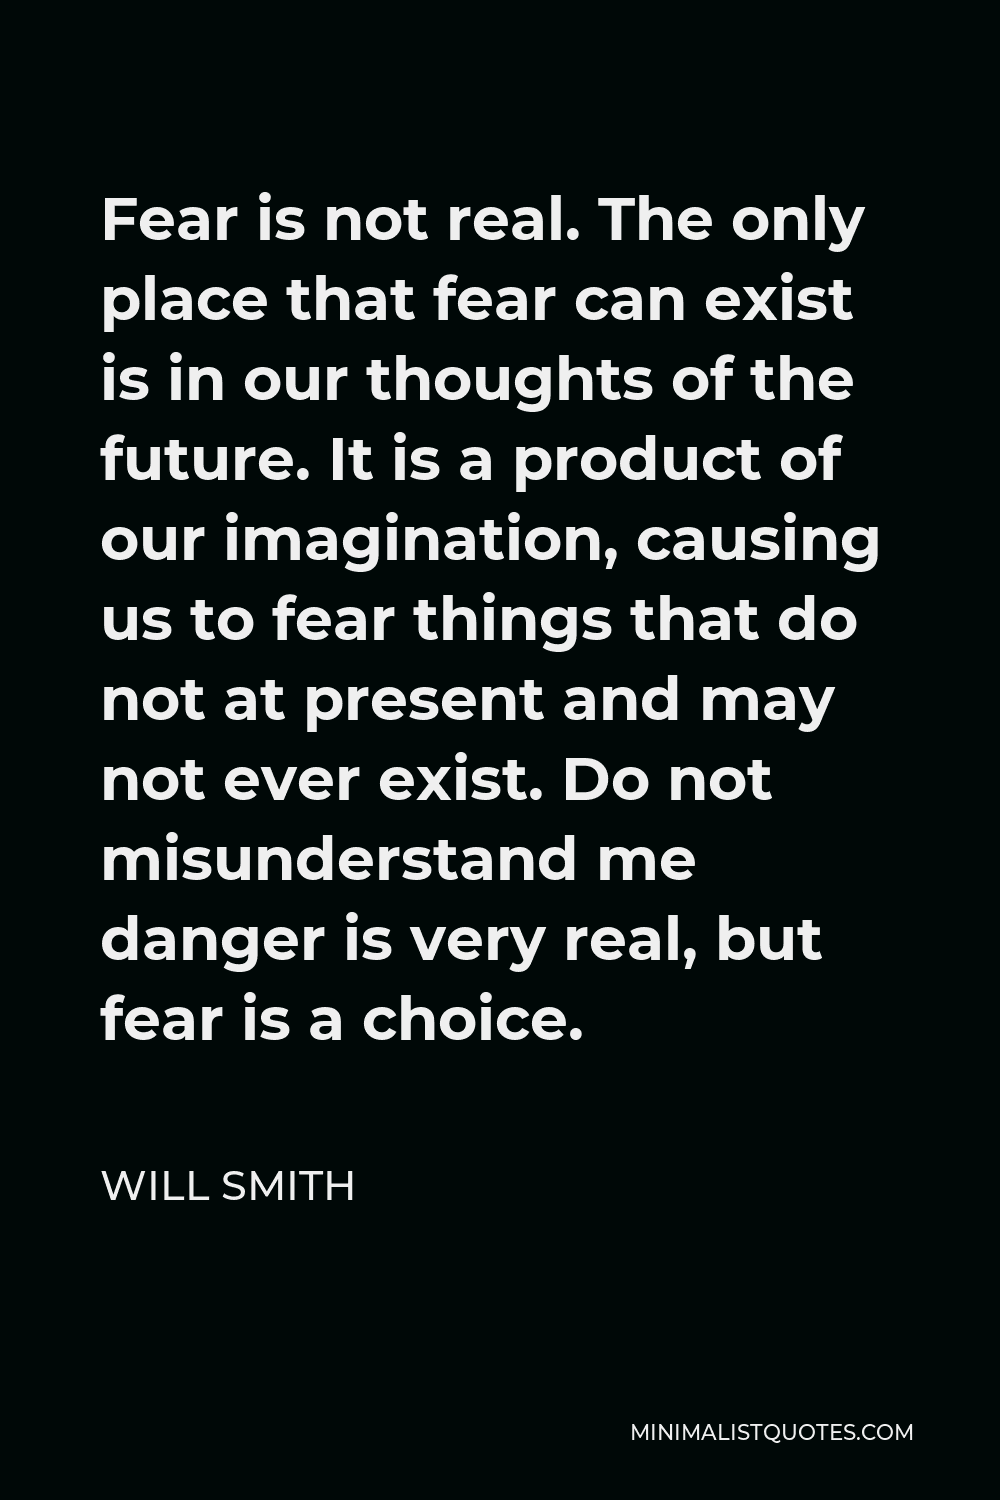 Will Smith Quote - Fear is not real. The only place that fear can exist is in our thoughts of the future. It is a product of our imagination, causing us to fear things that do not at present and may not ever exist. Do not misunderstand me danger is very real, but fear is a choice.